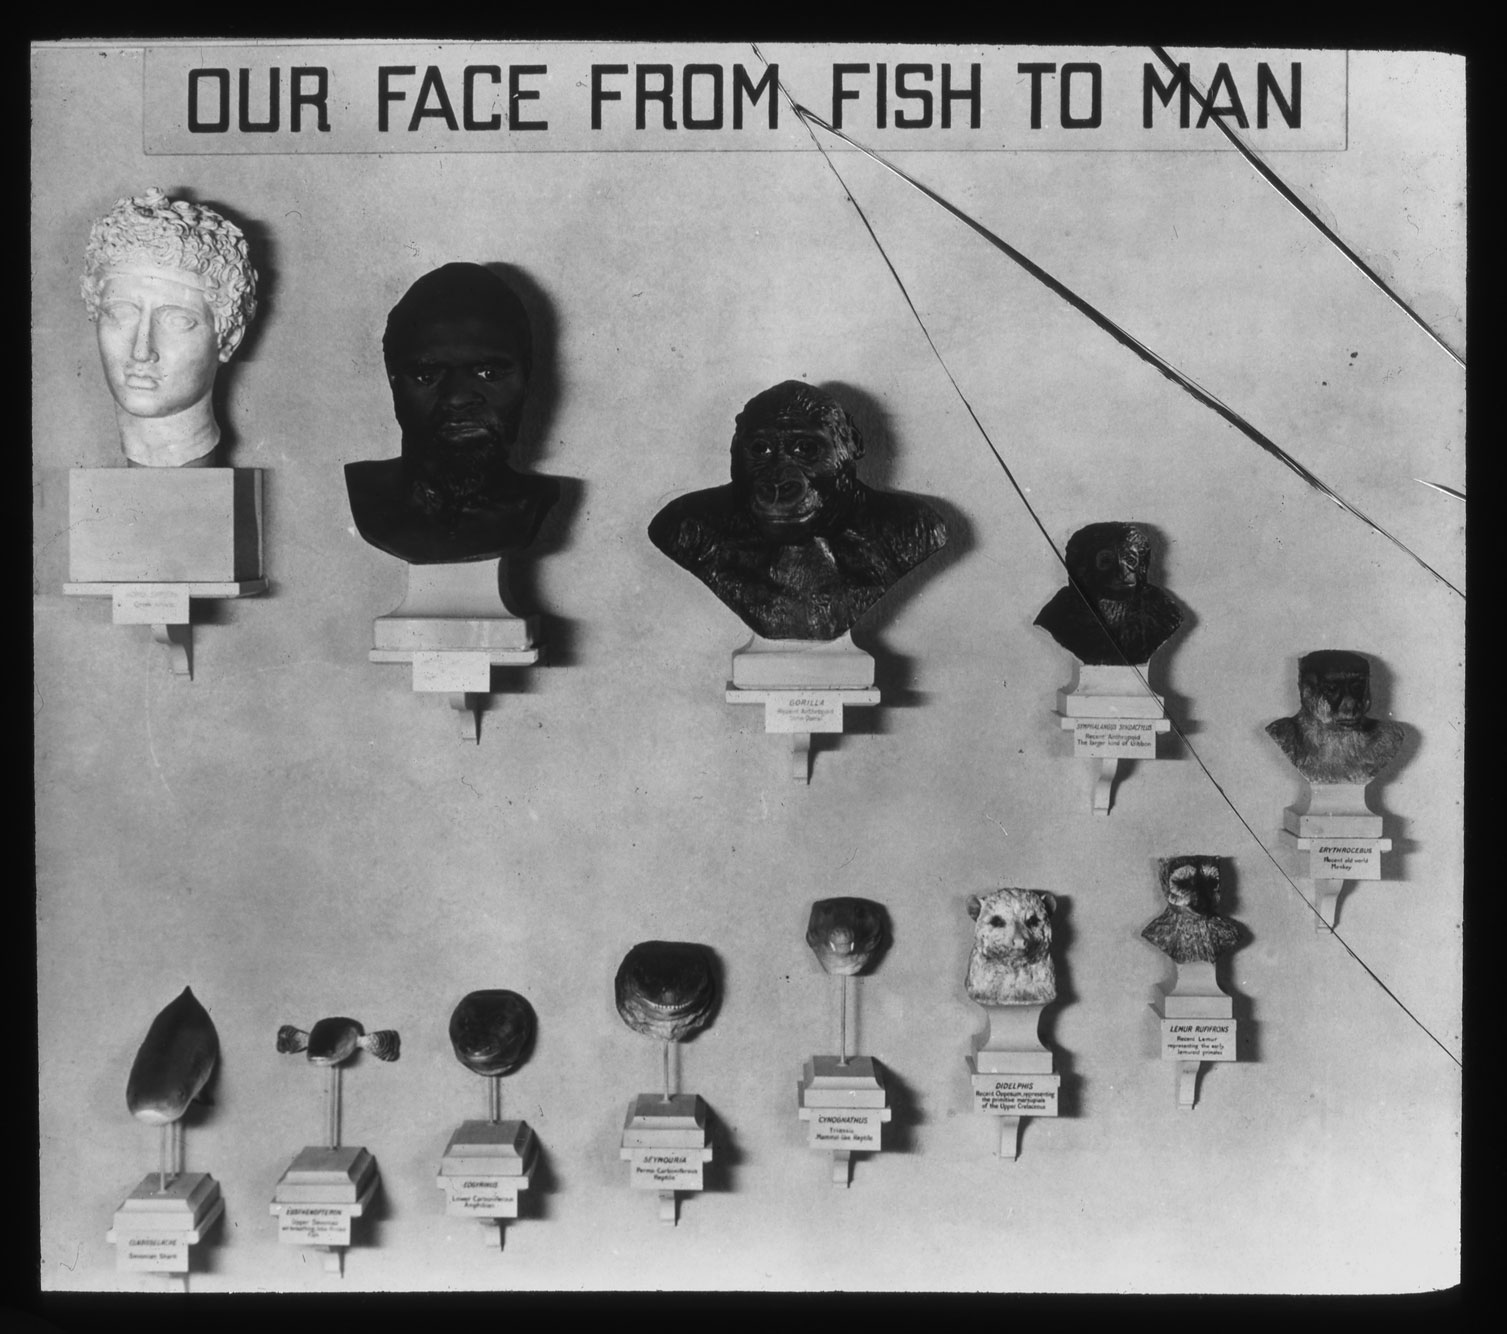 A black and white slide containing a photo of a eugenics exhibit that featured three-dimensional structures or busts of humans and other lifeforms ordered hierarchically, called 'Our Face From Fish to Man.'